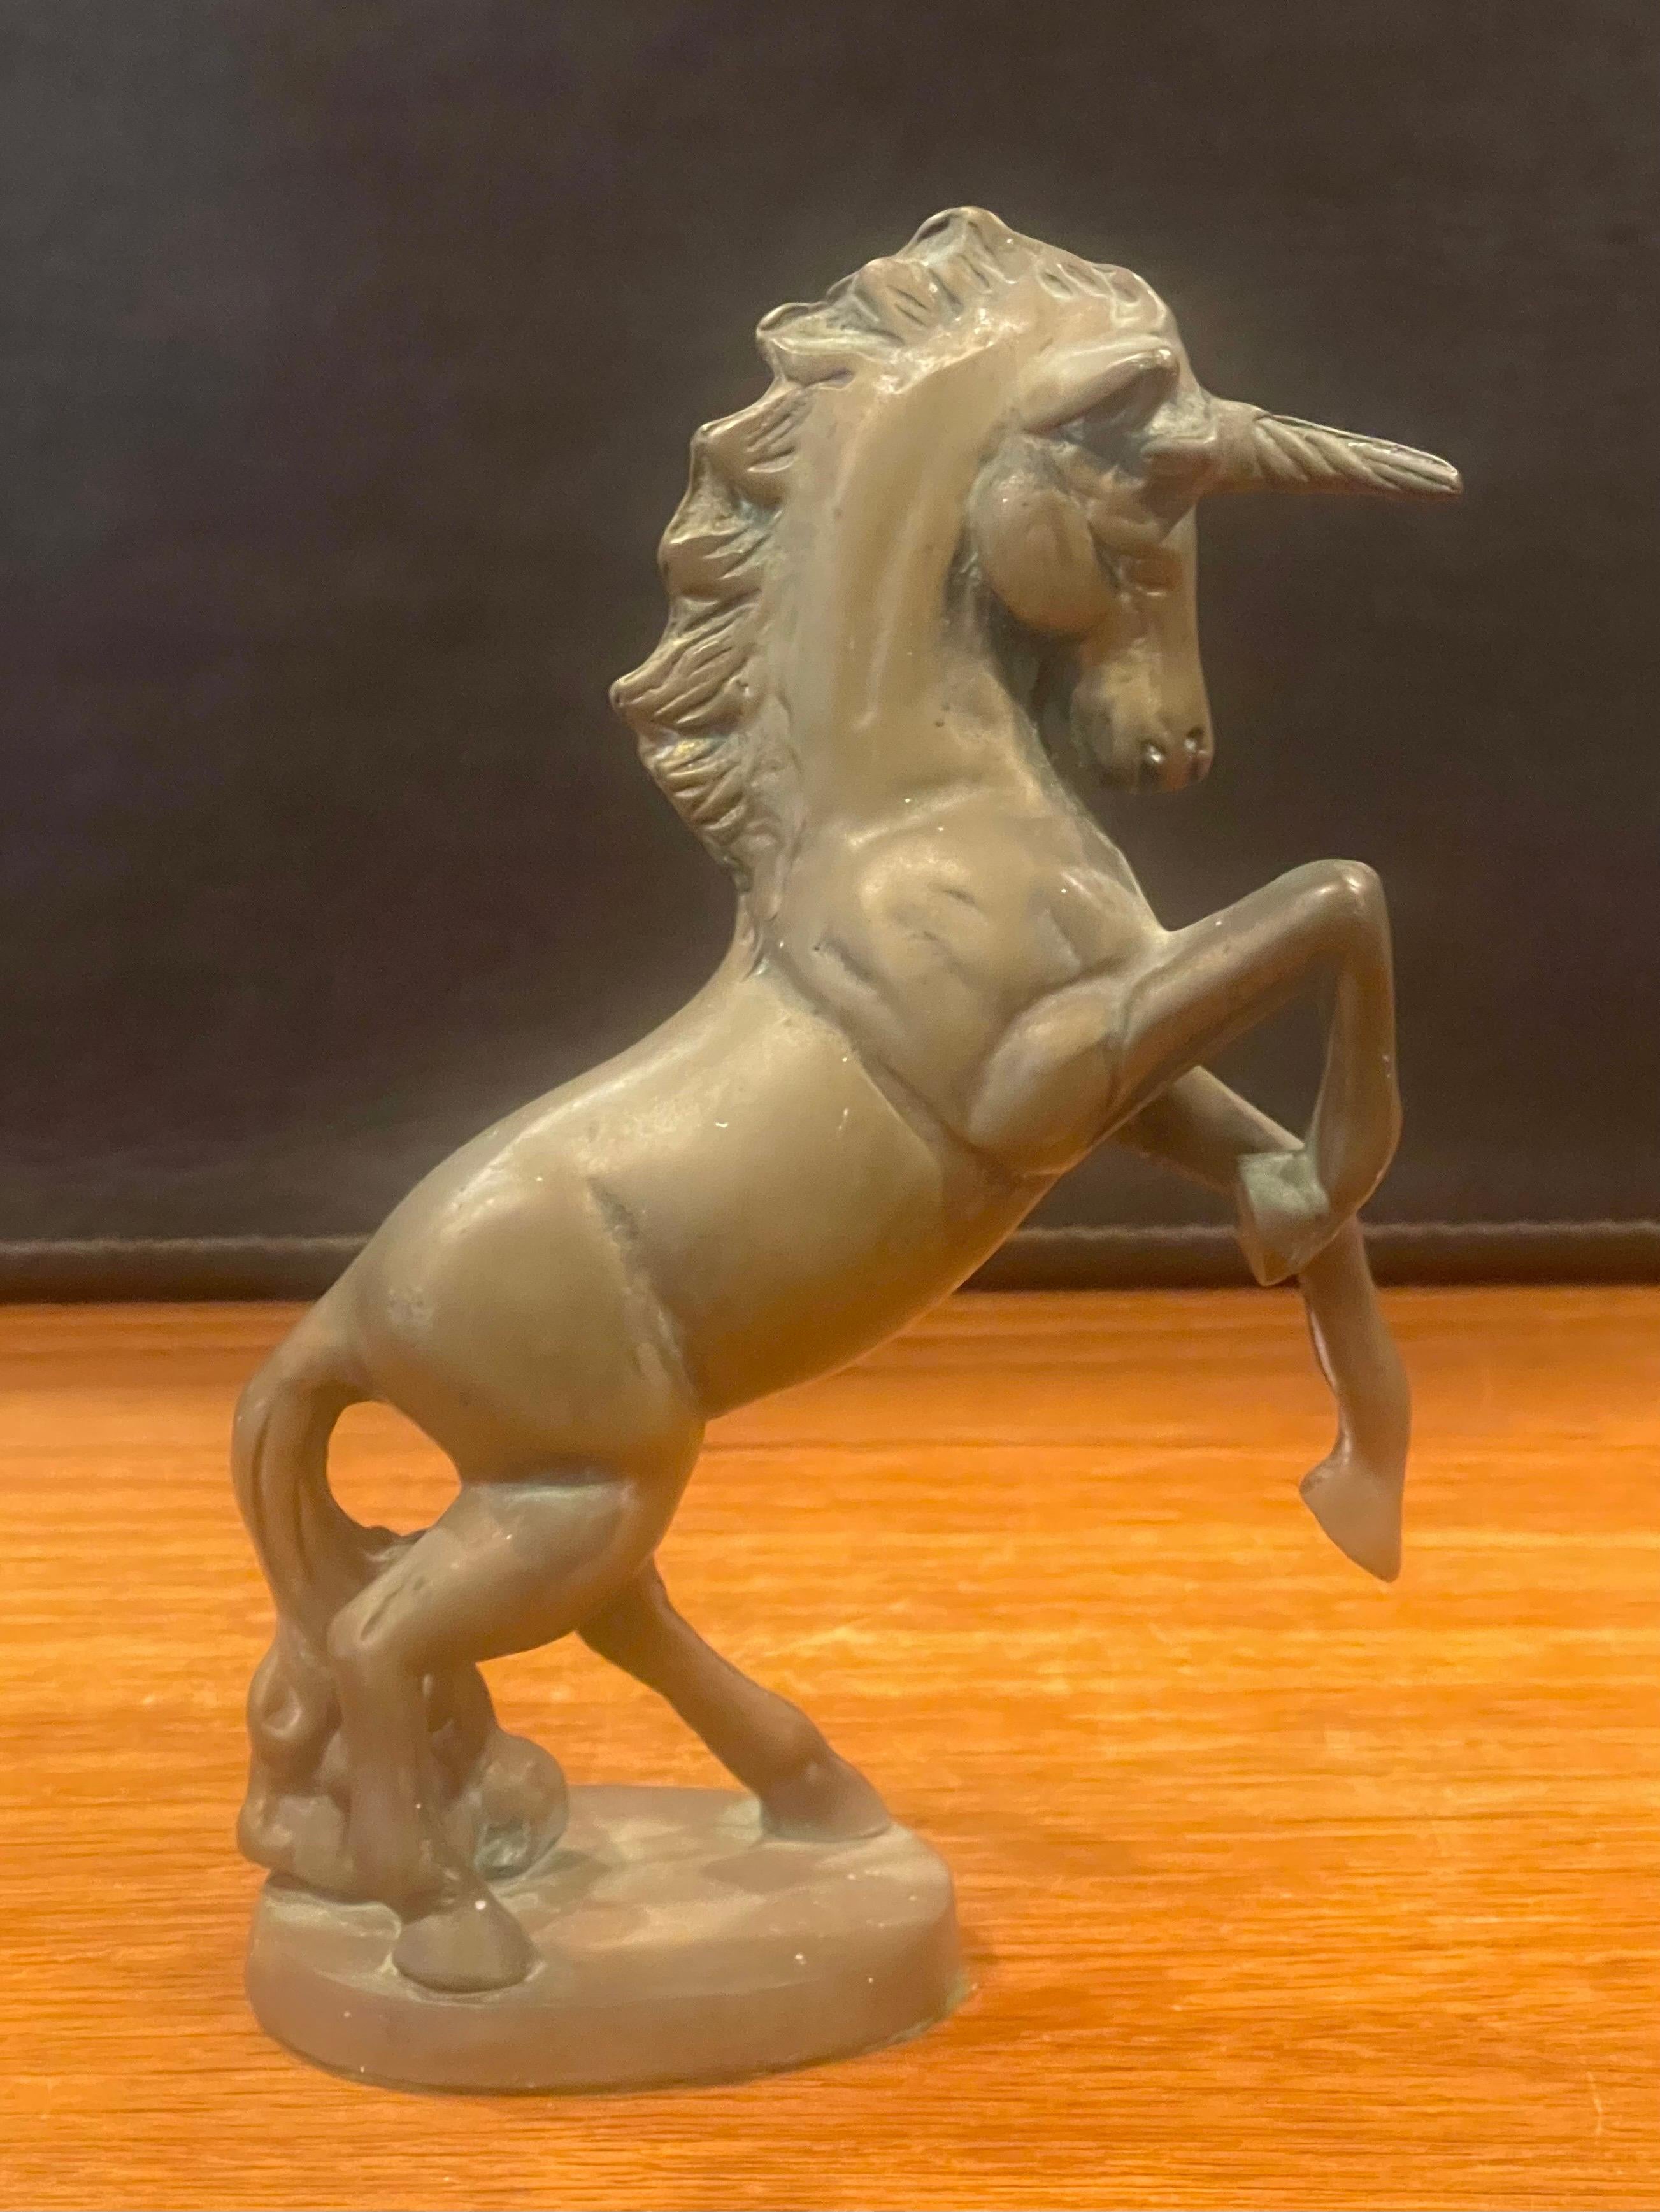 Vintage solid brass unicorn sculpture circa, 1970s. The piece is in good vintage condition with a great patina and measures 3